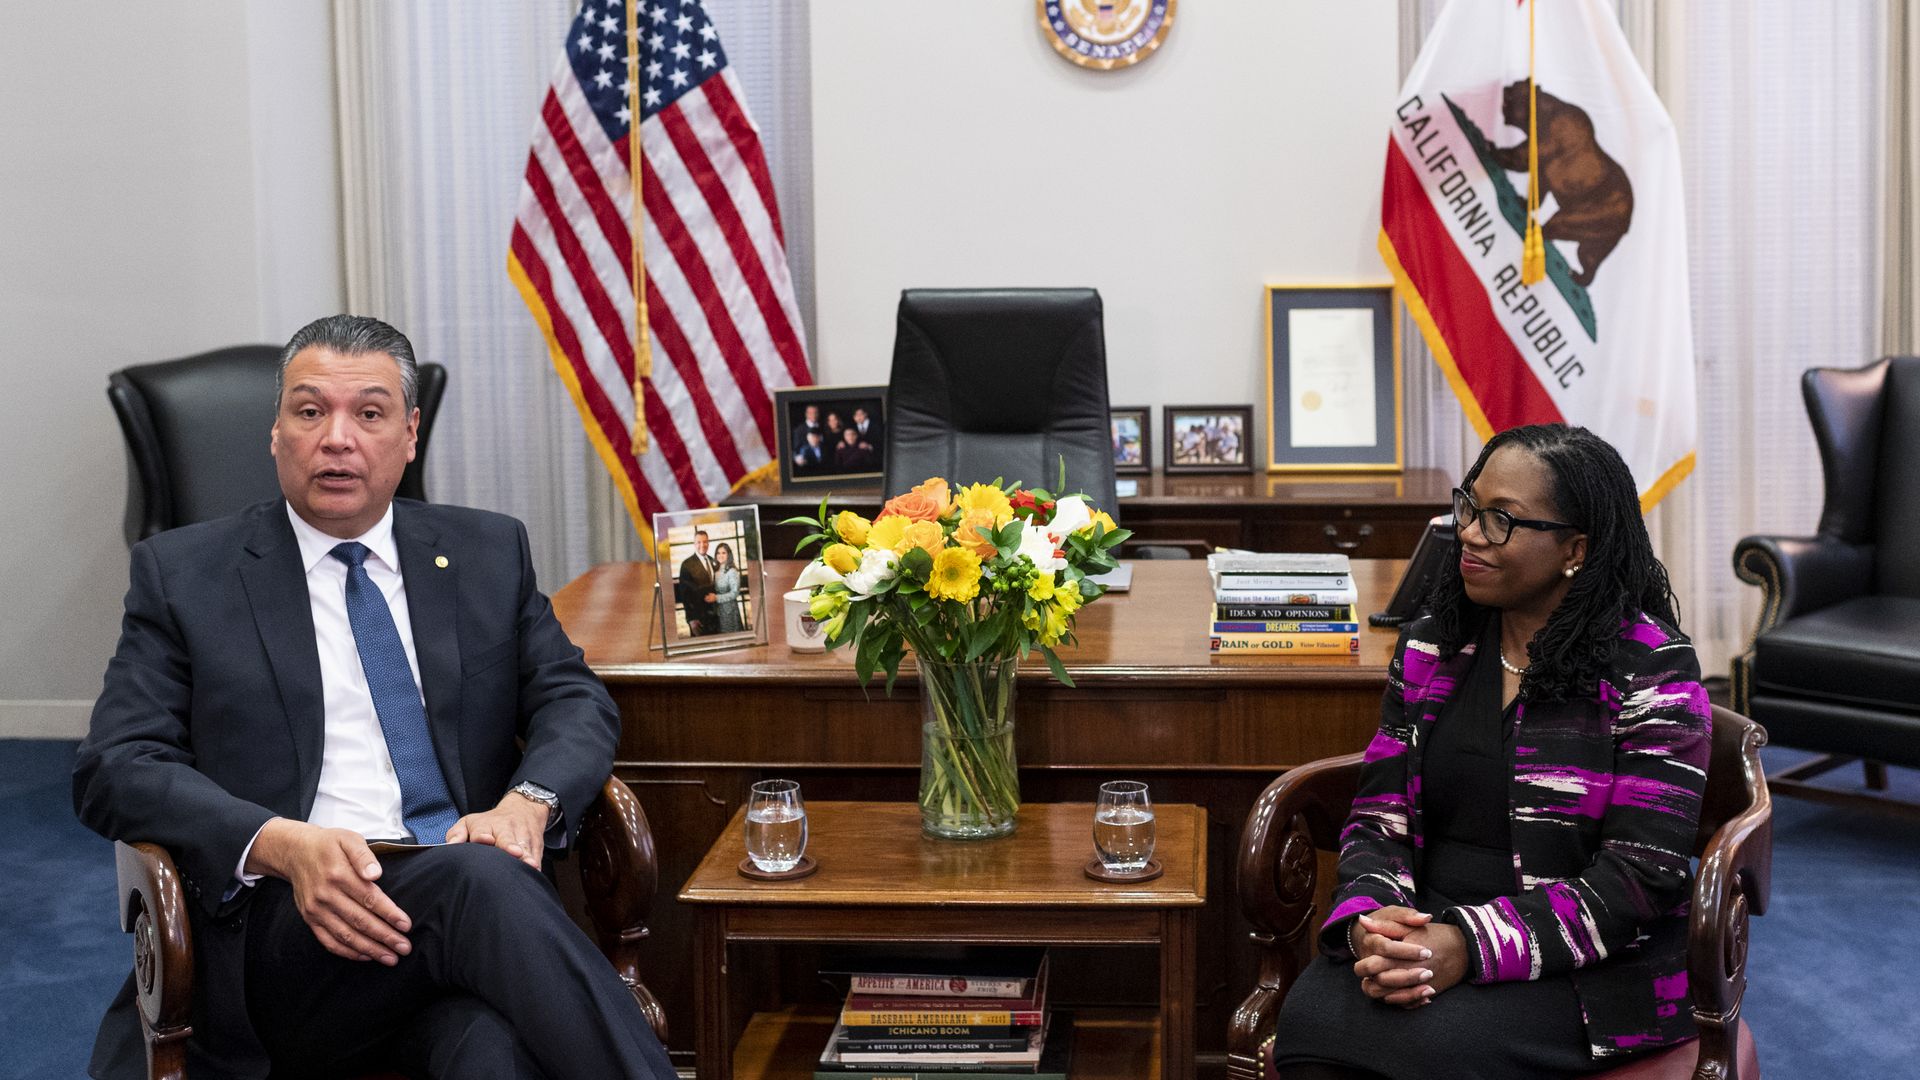 U.S. Sen. Alex Padilla (D-CA) sits with Judge Ketanji Brown Jackson, President Biden's nominee for Associate Justice to the Supreme Court in the Hart Senate Office Building.